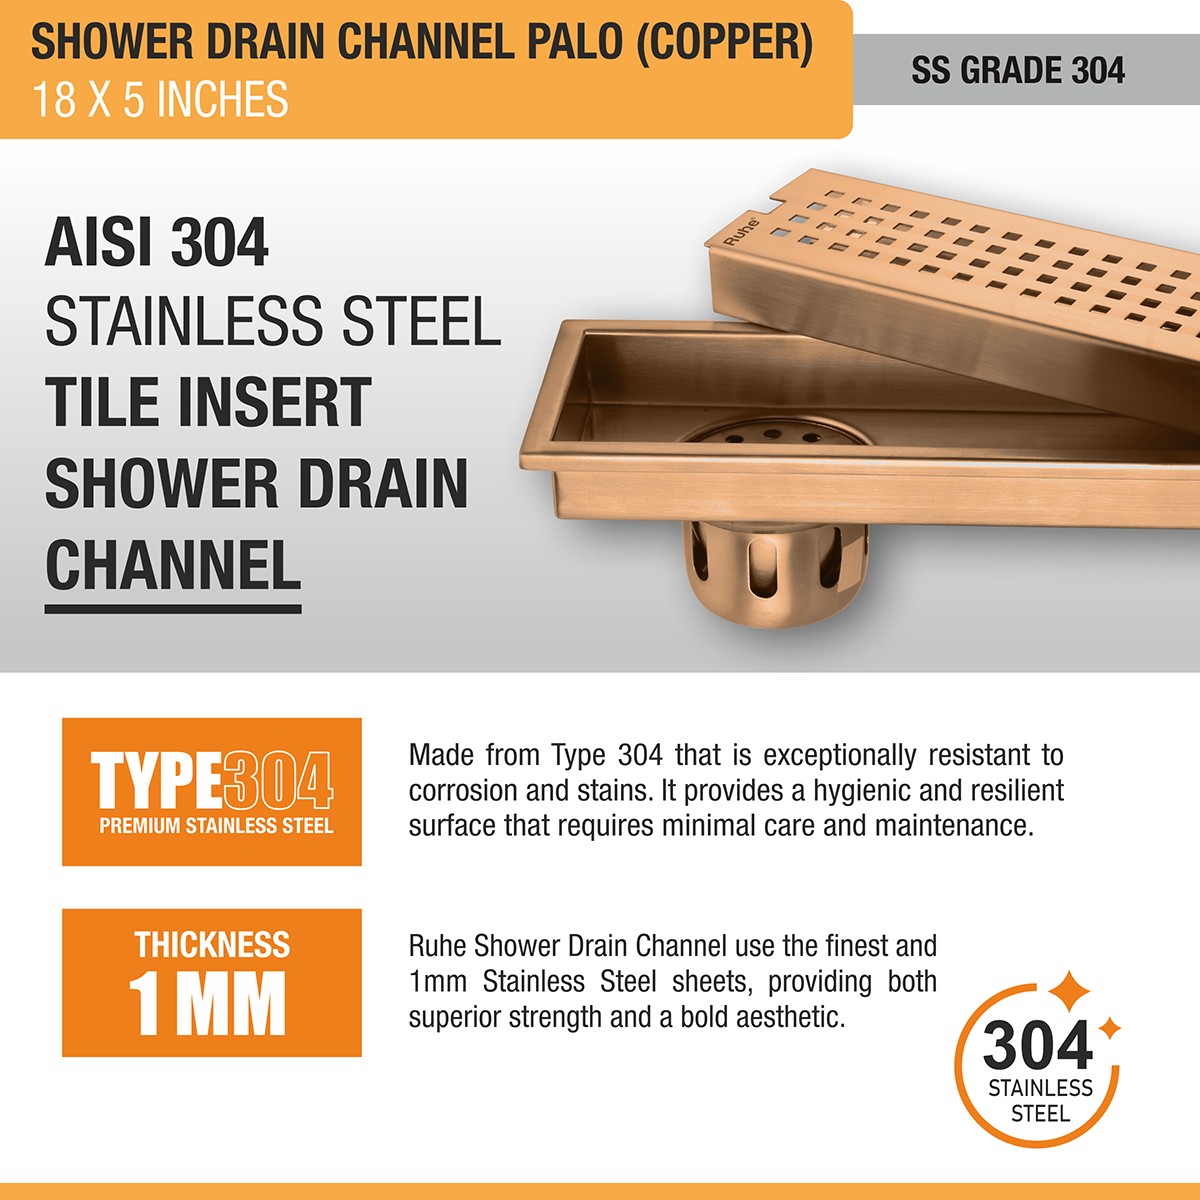 Palo Shower Drain Channel (18 x 5 Inches) ROSE GOLD/ANTIQUE COPPER stainless steel